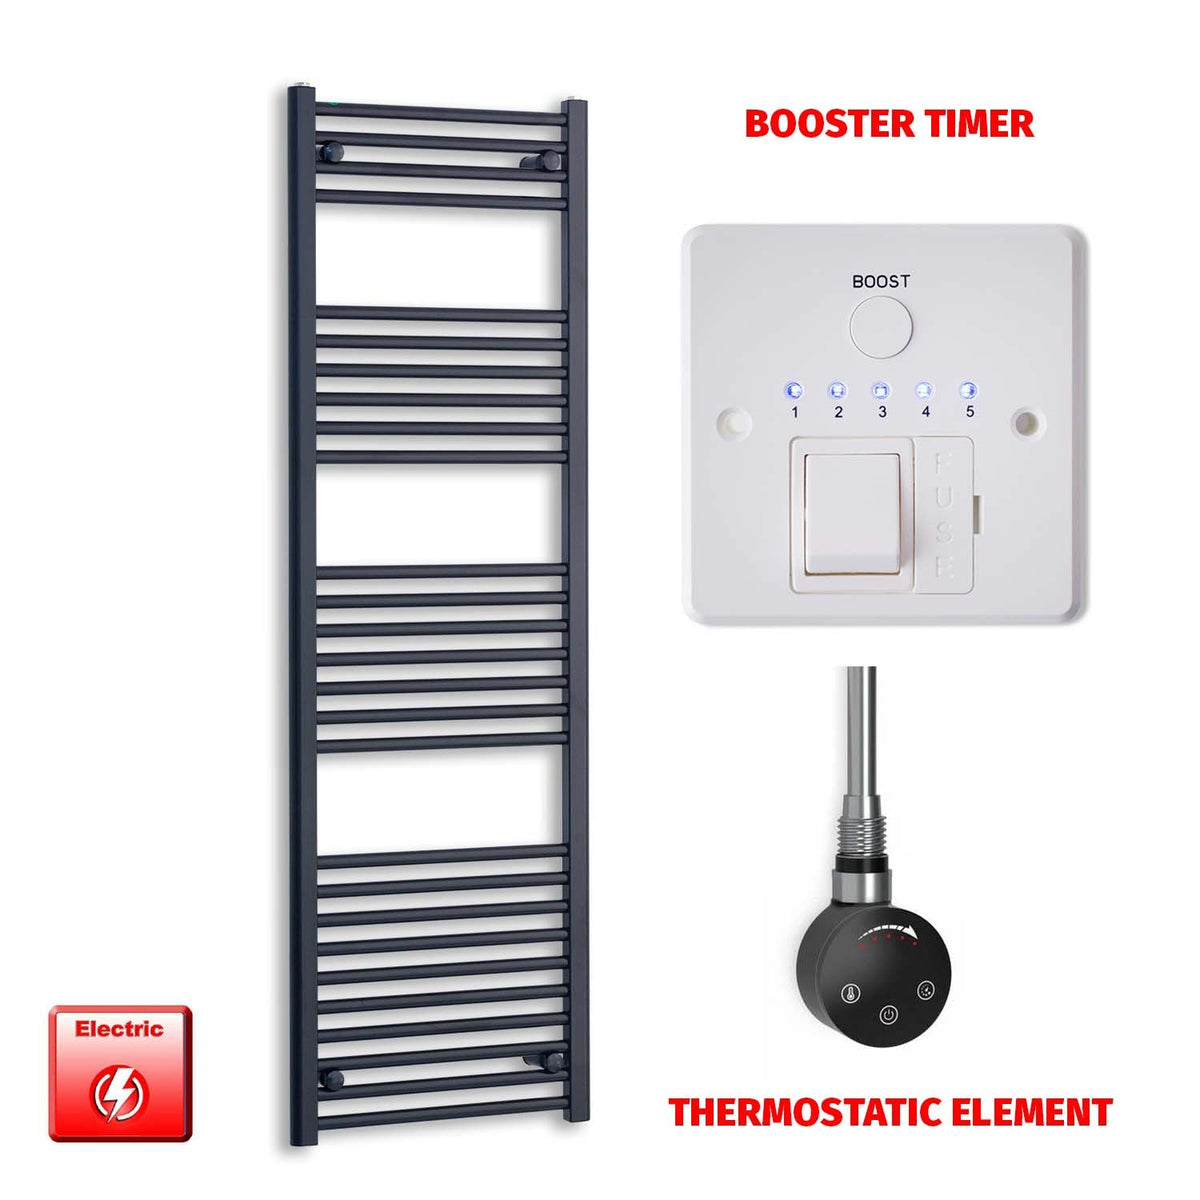 1600 x 500 Flat Black Pre-Filled Electric Heated Towel Radiator HTR Smart Thermostatic Booster Timer